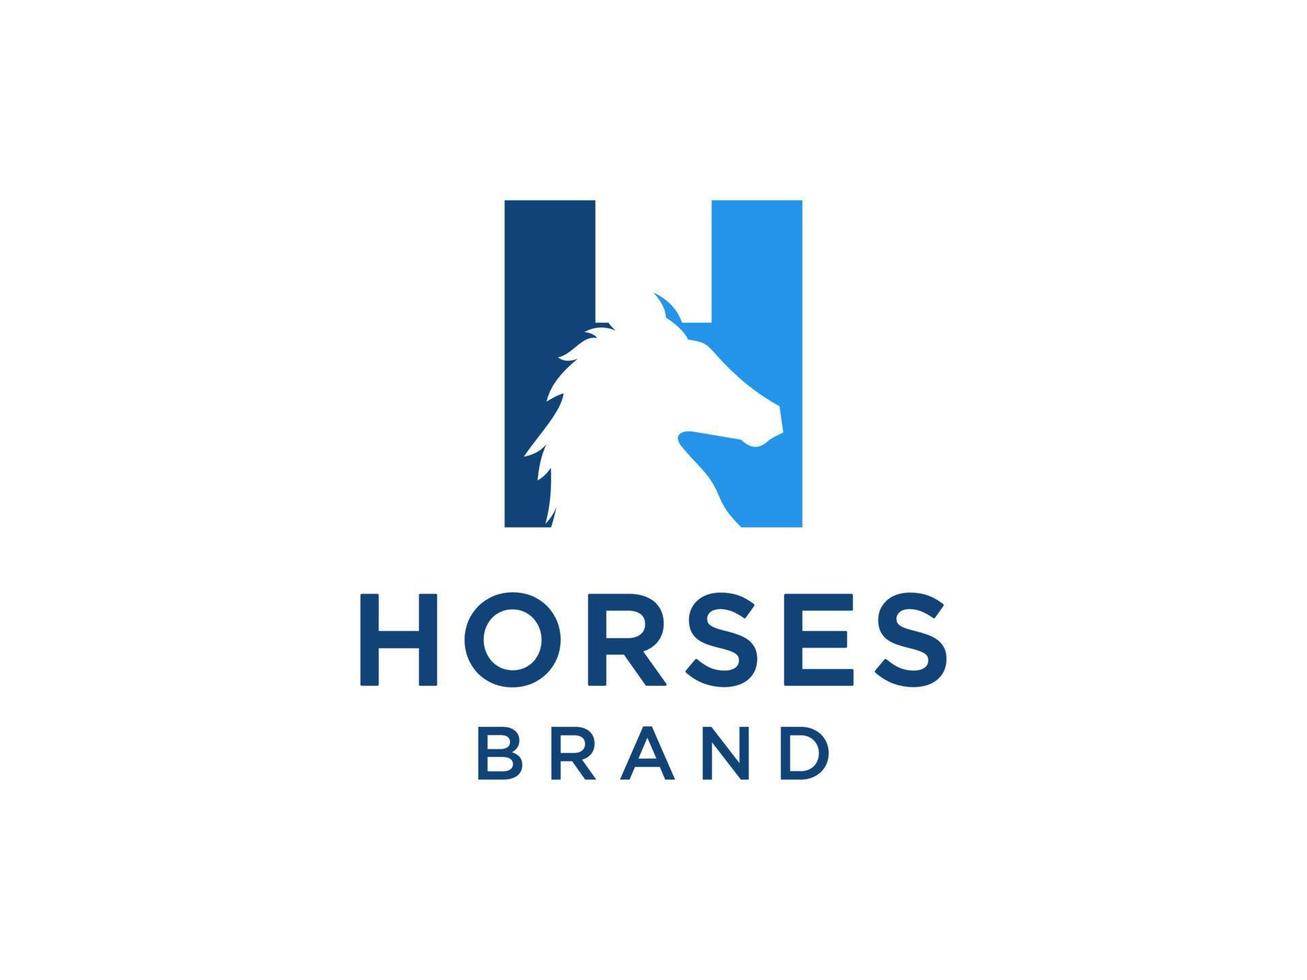 The logo design with the initial letter H is combined with a modern and professional horse head symbol vector